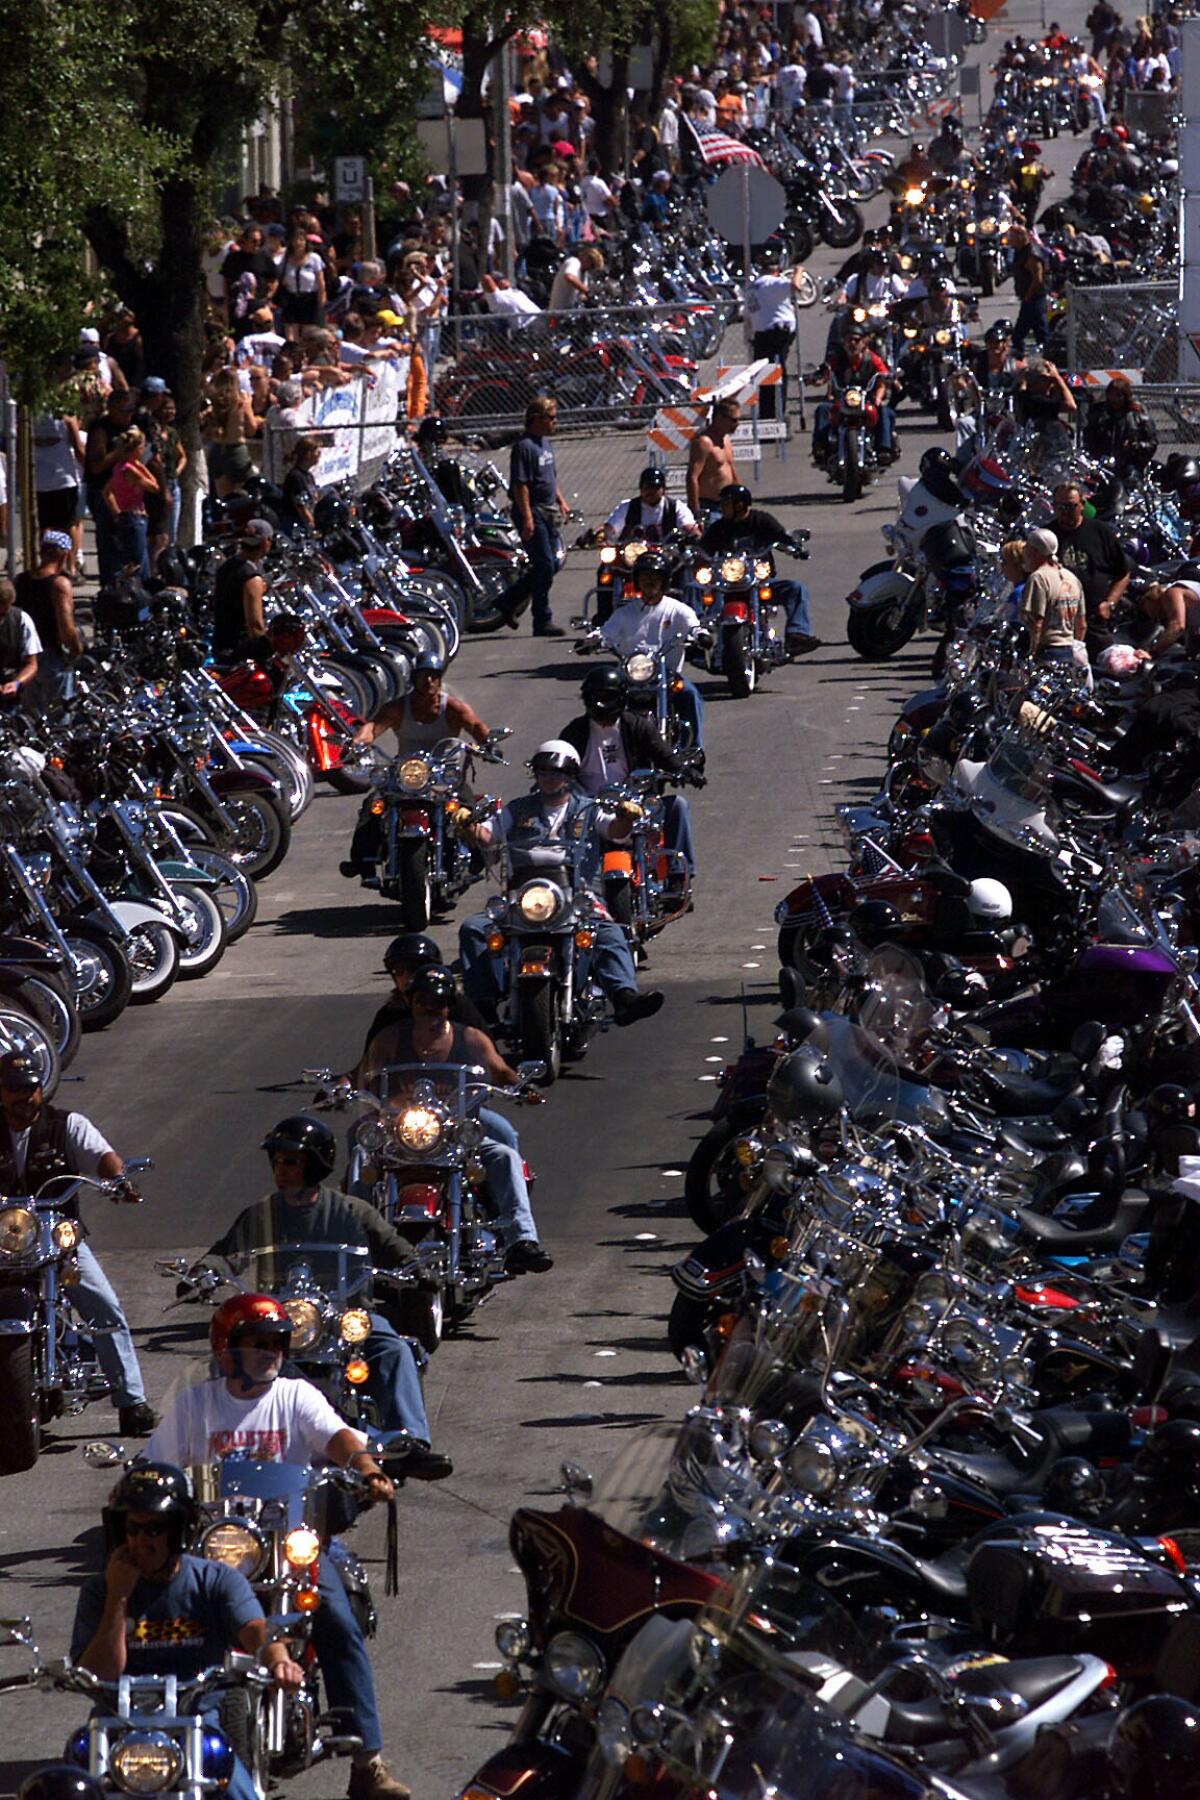 A line of motorcycles.